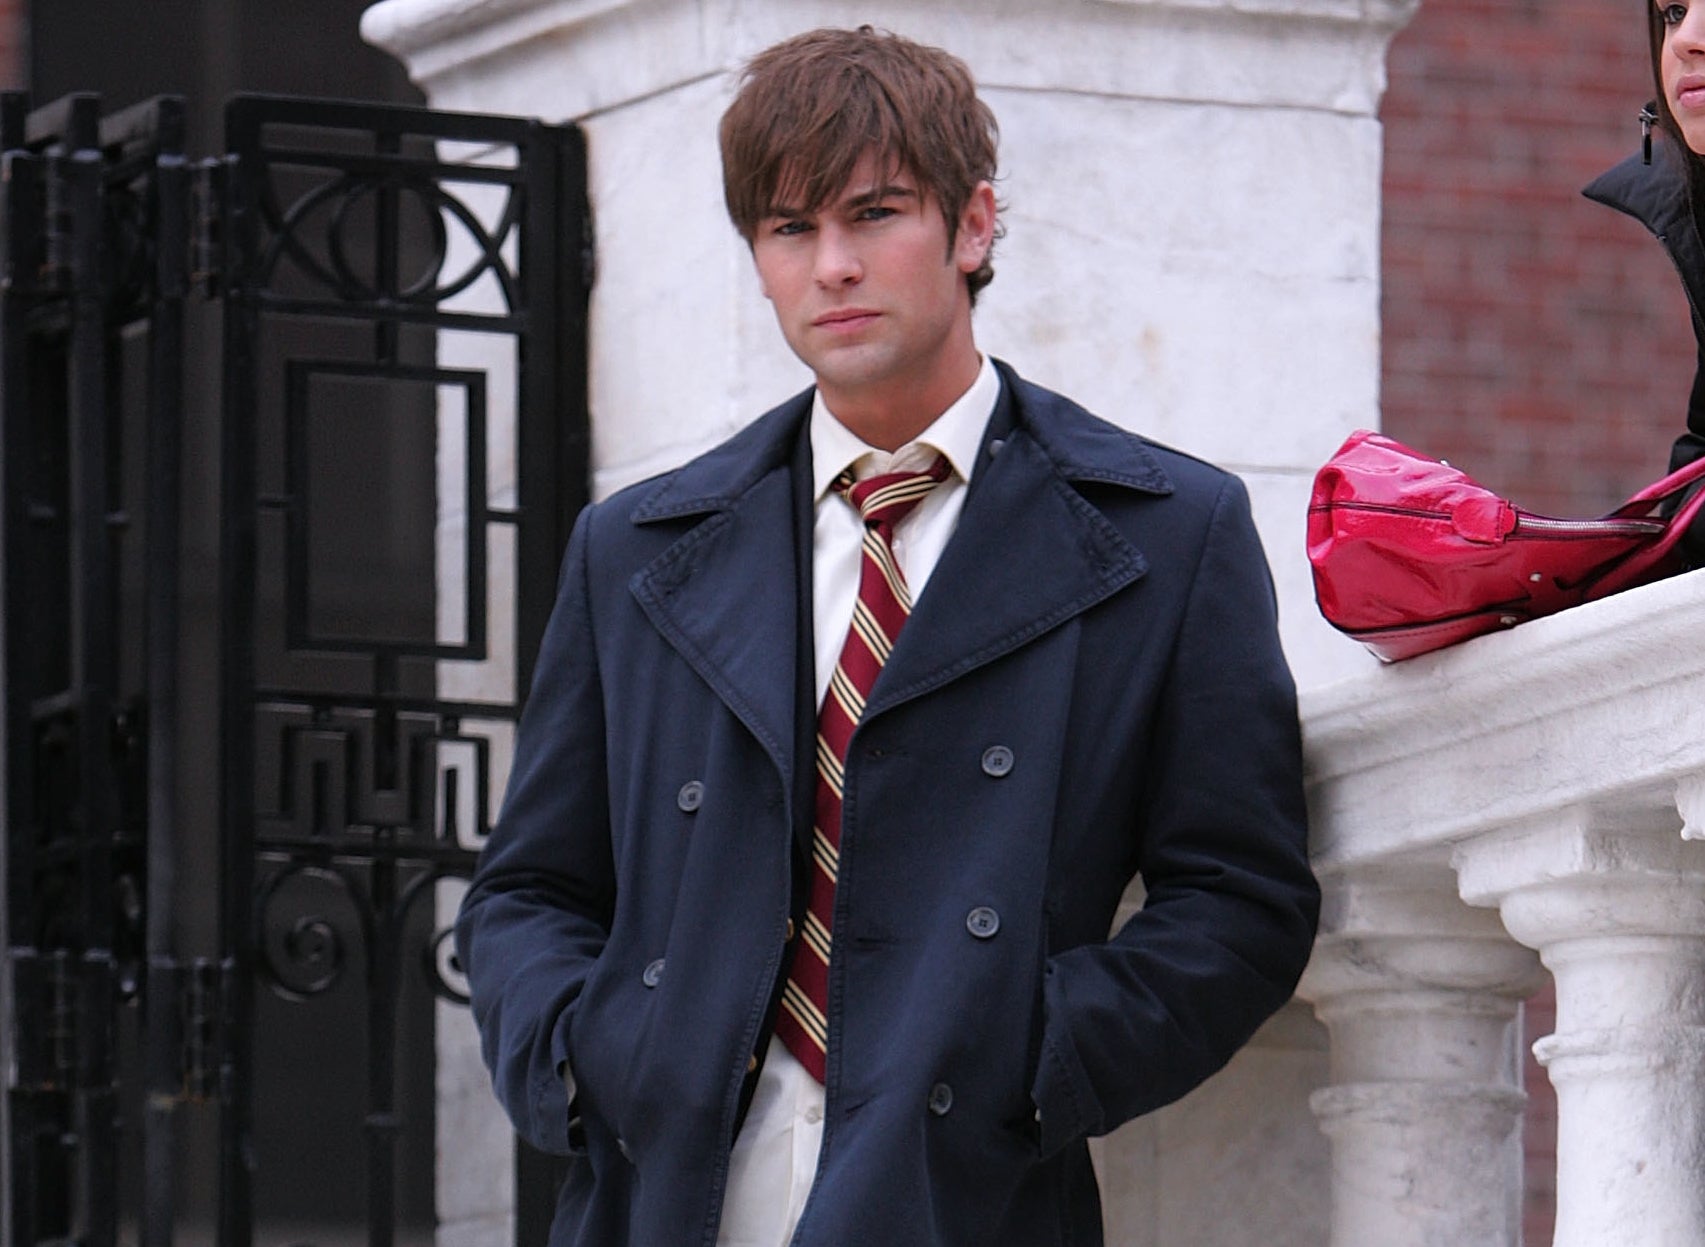 Nate stands on a marble staircase outside of a building while filming the show 